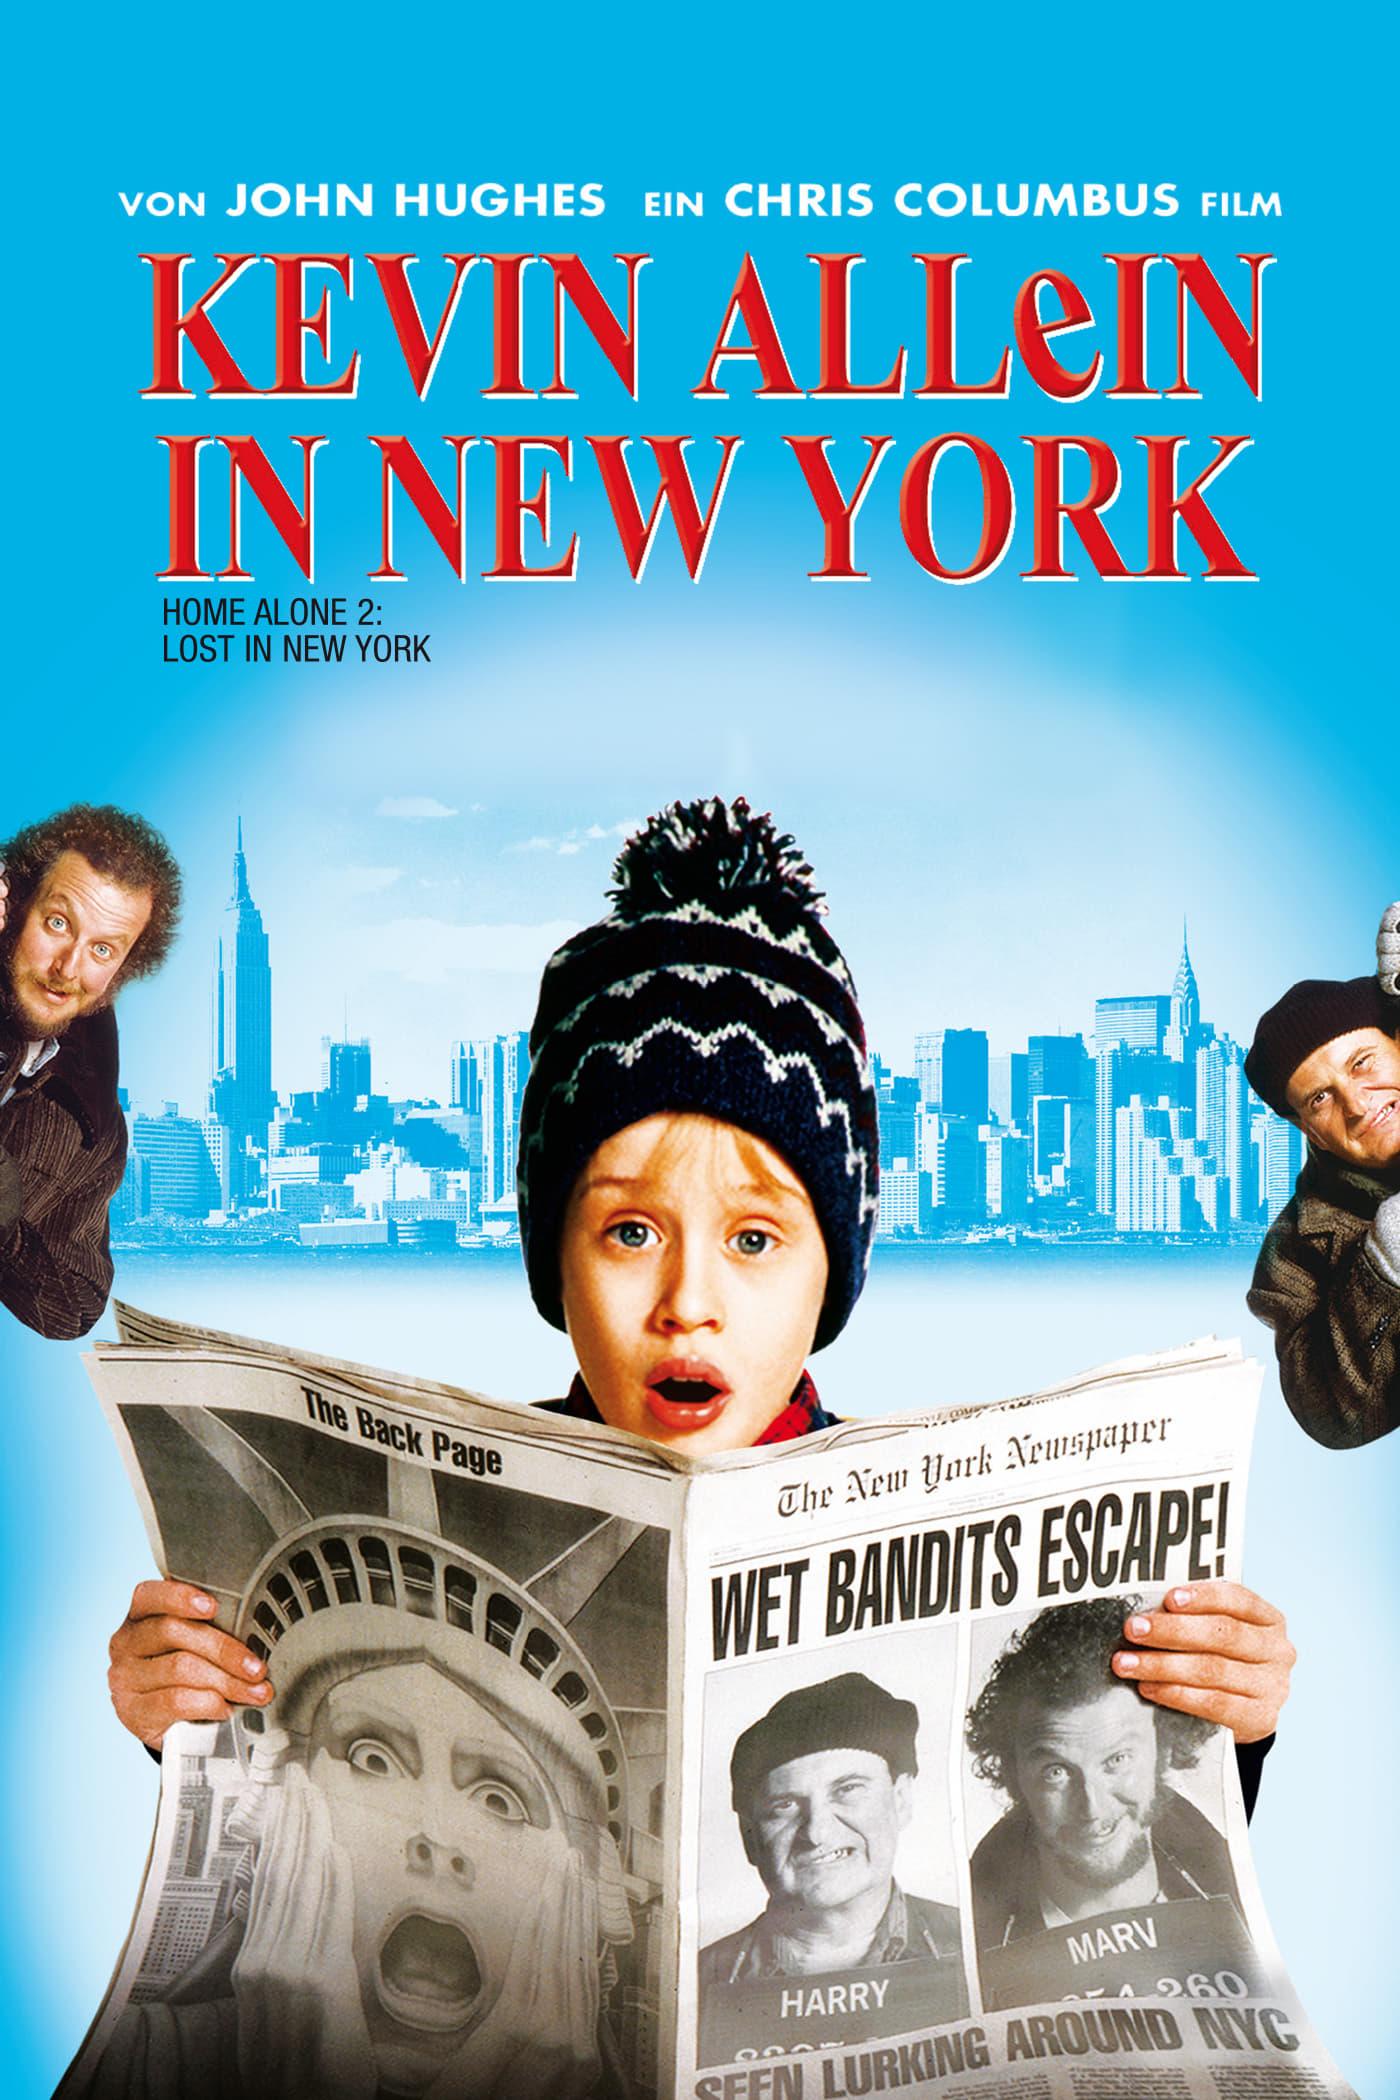 Kevin - Allein in New York poster